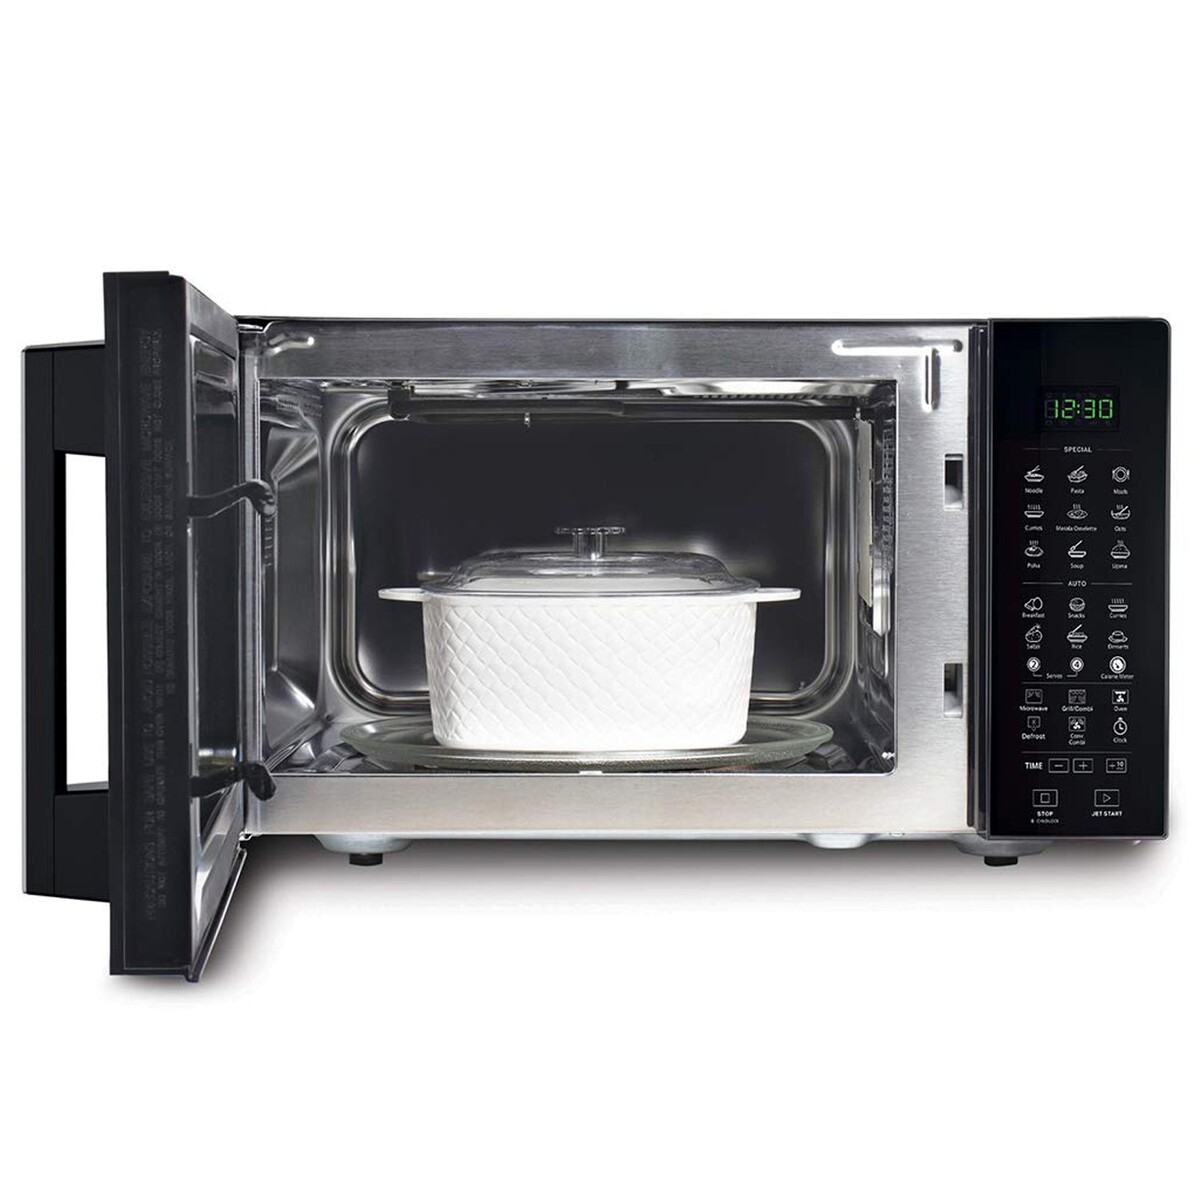 Whirlpool Microwave Oven Magicook Pro 26CE Black 24 Litre